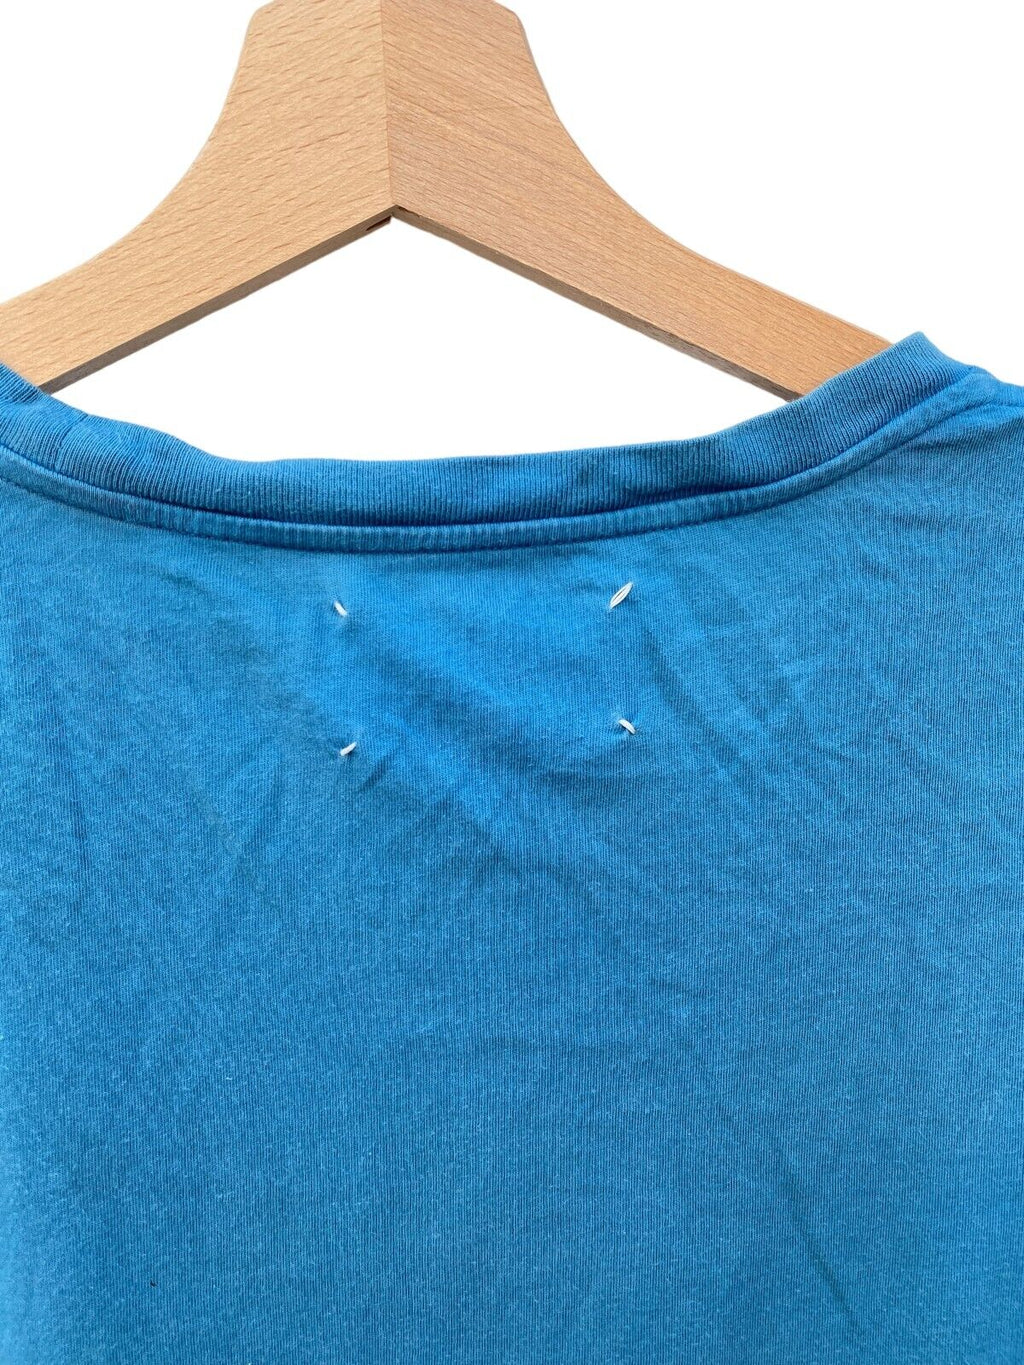 Blue T-shirt Size 48 / M   Good overall condition